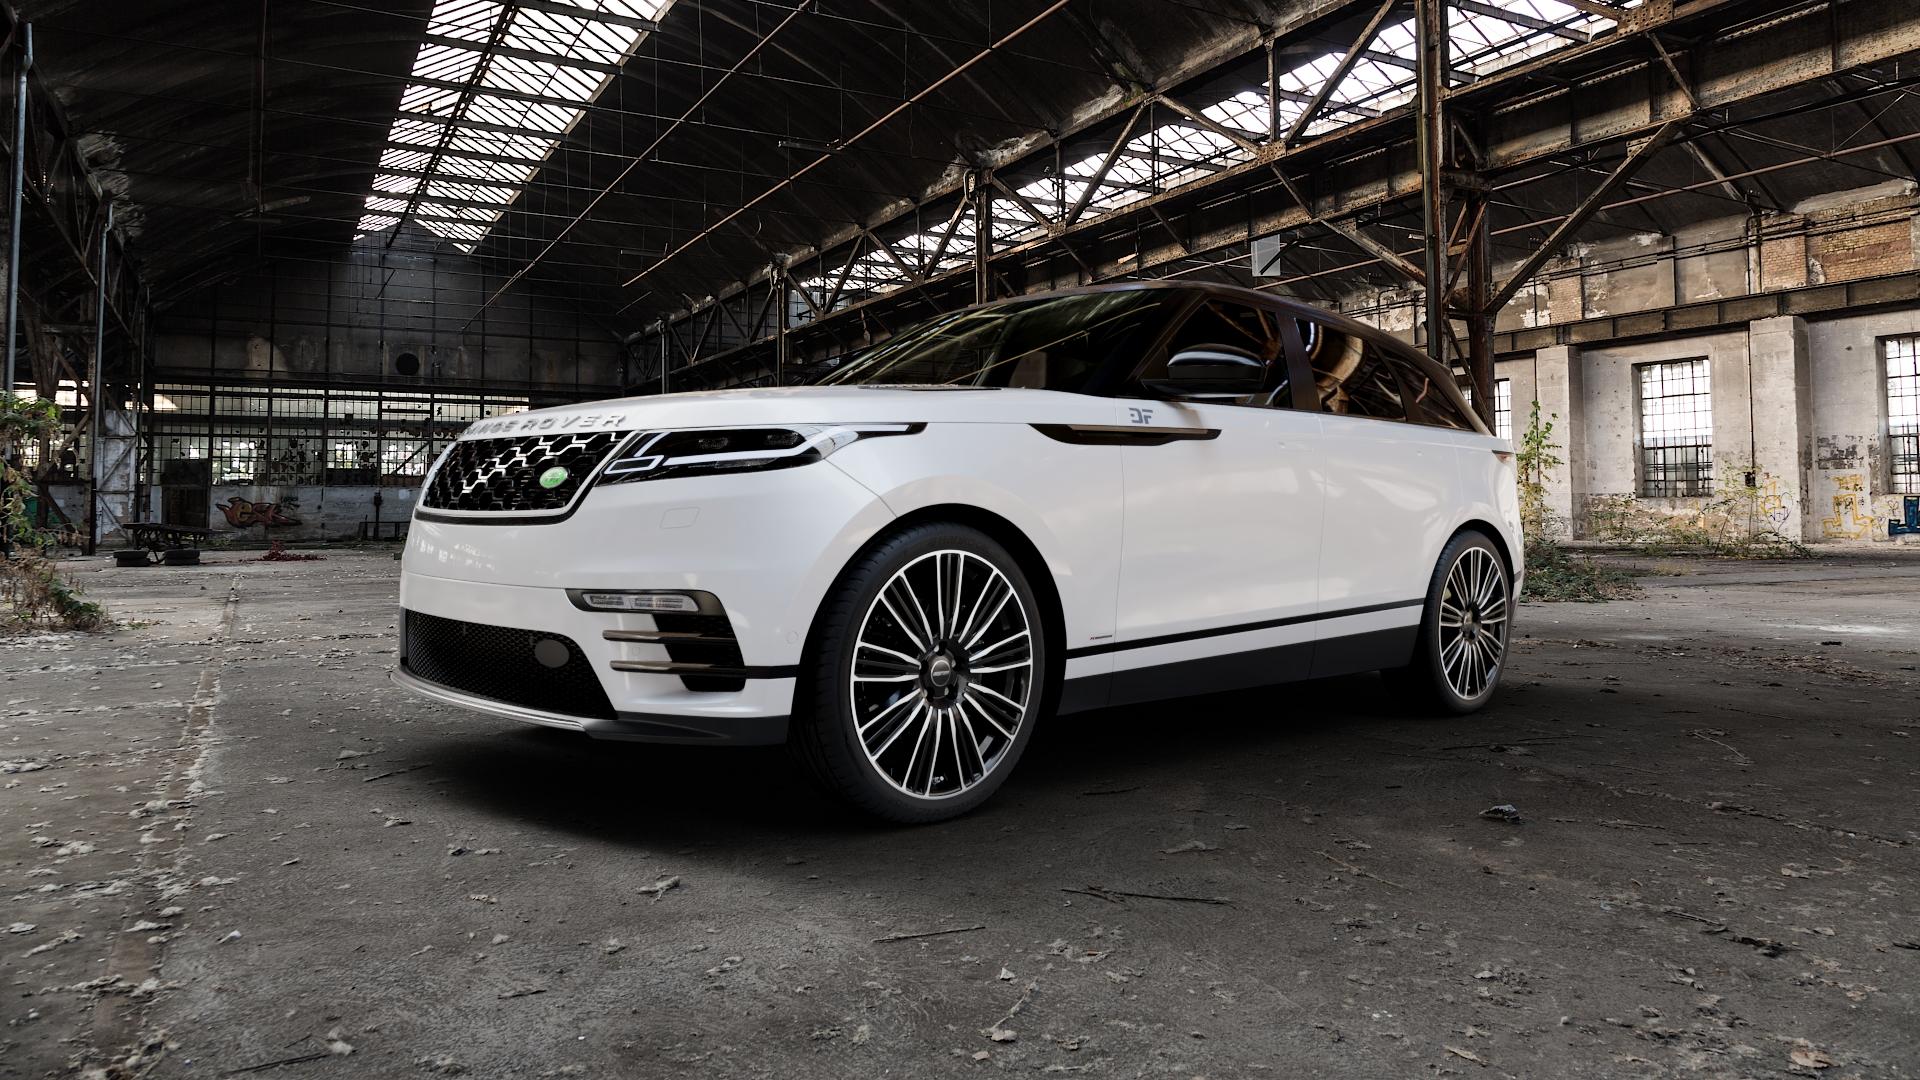 Land Rover Range Rover Velar Type LY 2,0l P250 184kW (250 hp) Wheels and  Tyre Packages | velonity.com